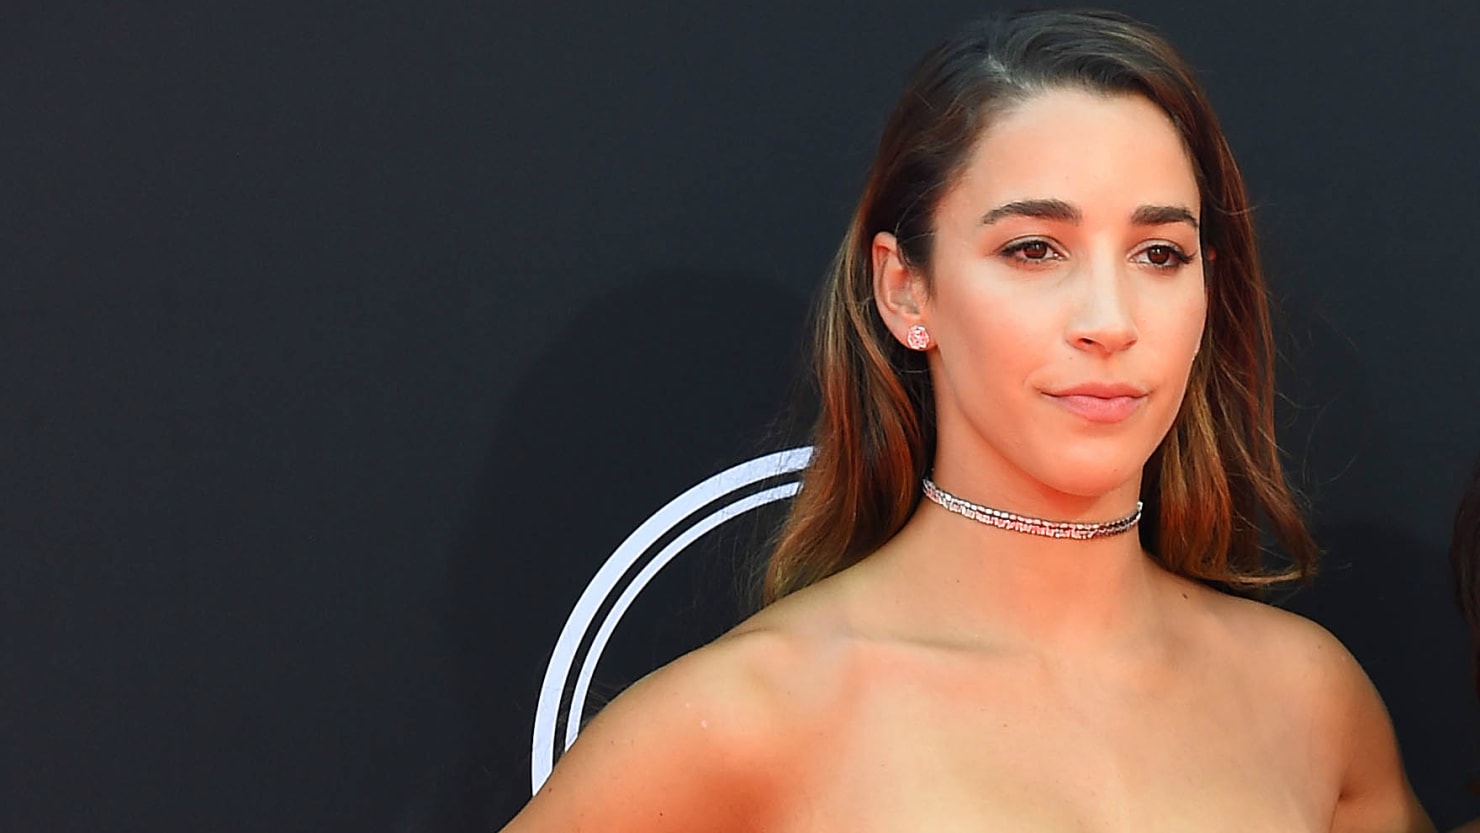 Olympian Aly Raisman Accuses Larry Nassar of Sexual Abuse